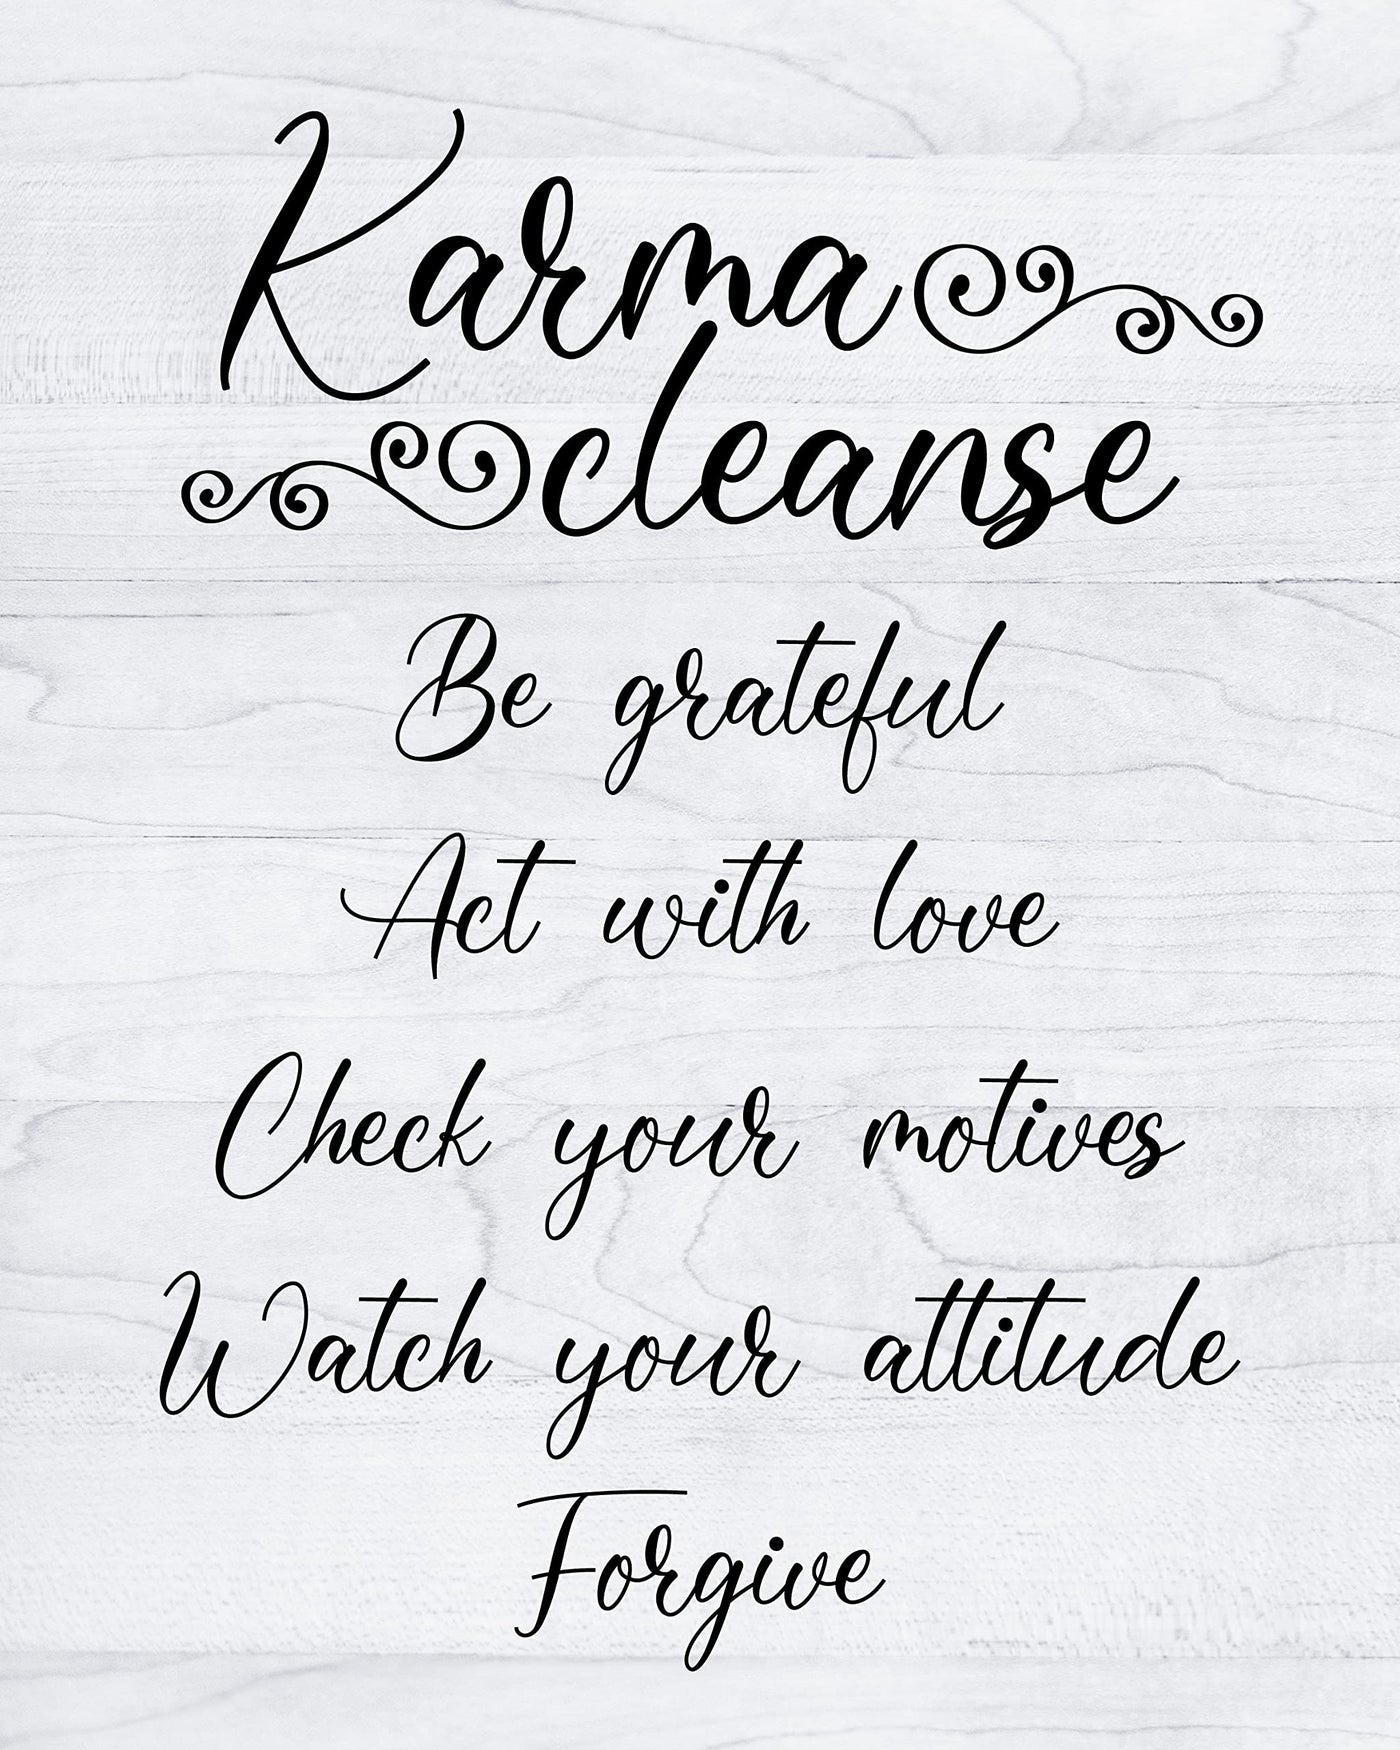 Karma Cleanse Spiritual Quotes Wall Art- 8 x 10" Modern Inspirational Wall Print -Ready to Frame. Motivational Home-Studio-Office Decor. Inspirational Reminders on Karma. Makes a Perfect Zen Gift!